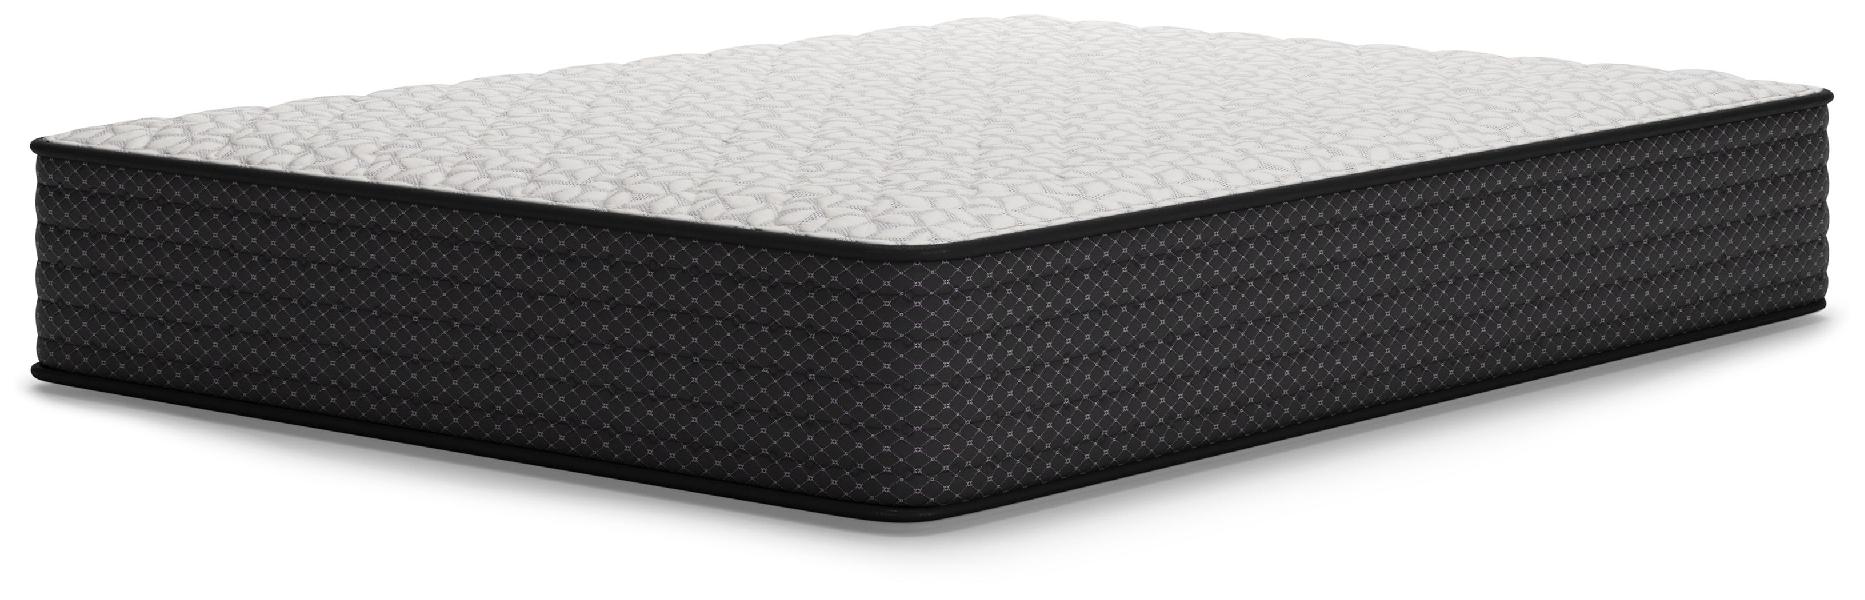 Image of Limited Edition Firm - White - Twin Xl Mattress